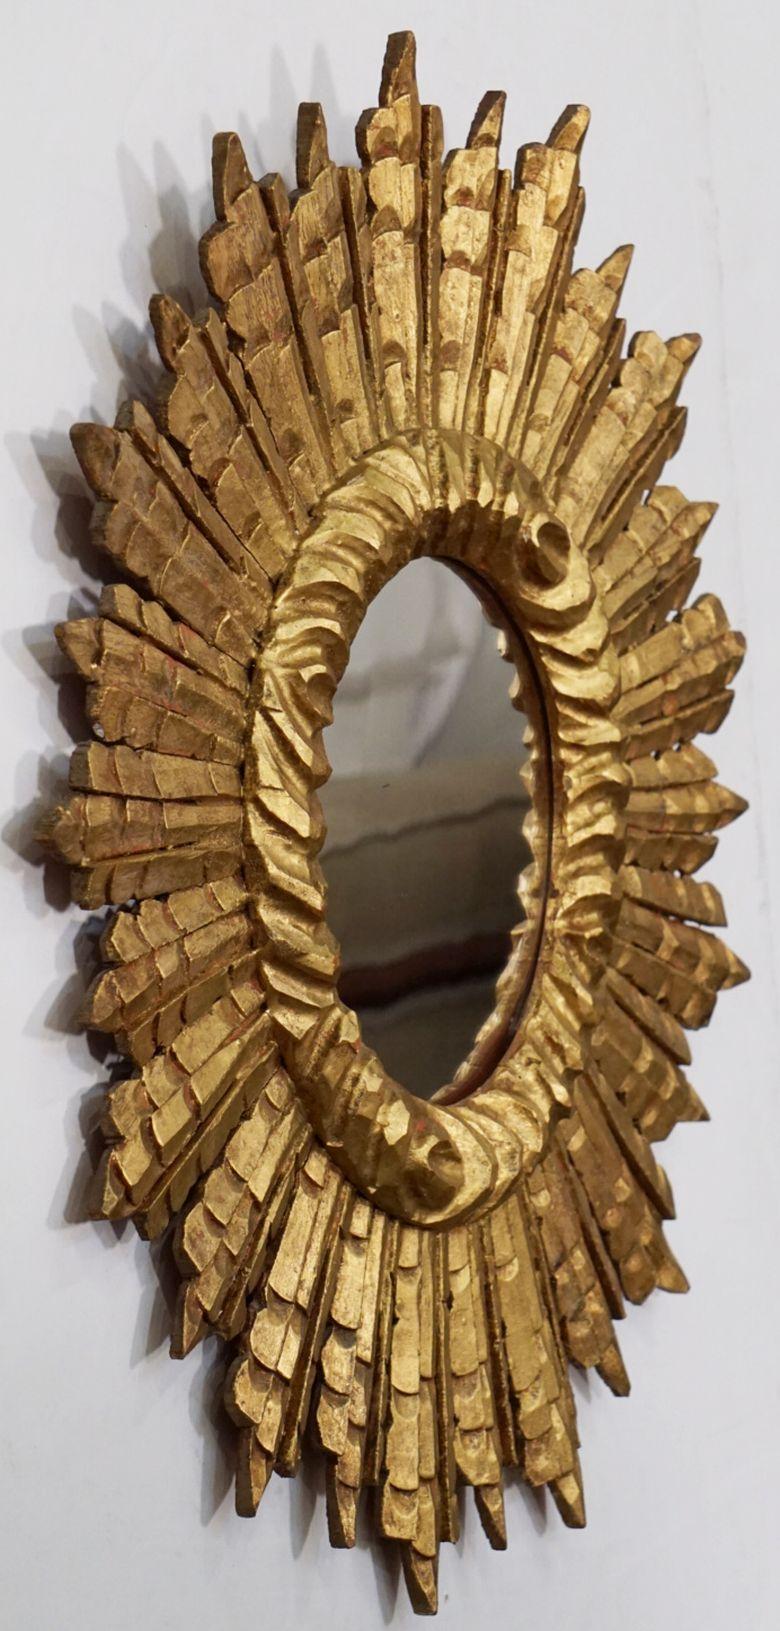 A fine large French gilt starburst or sunburst mirror, featuring a deeply carved bezel with a mass of gilded rays and the original mirror plate.

Dimensions: Diameter of 24 inches